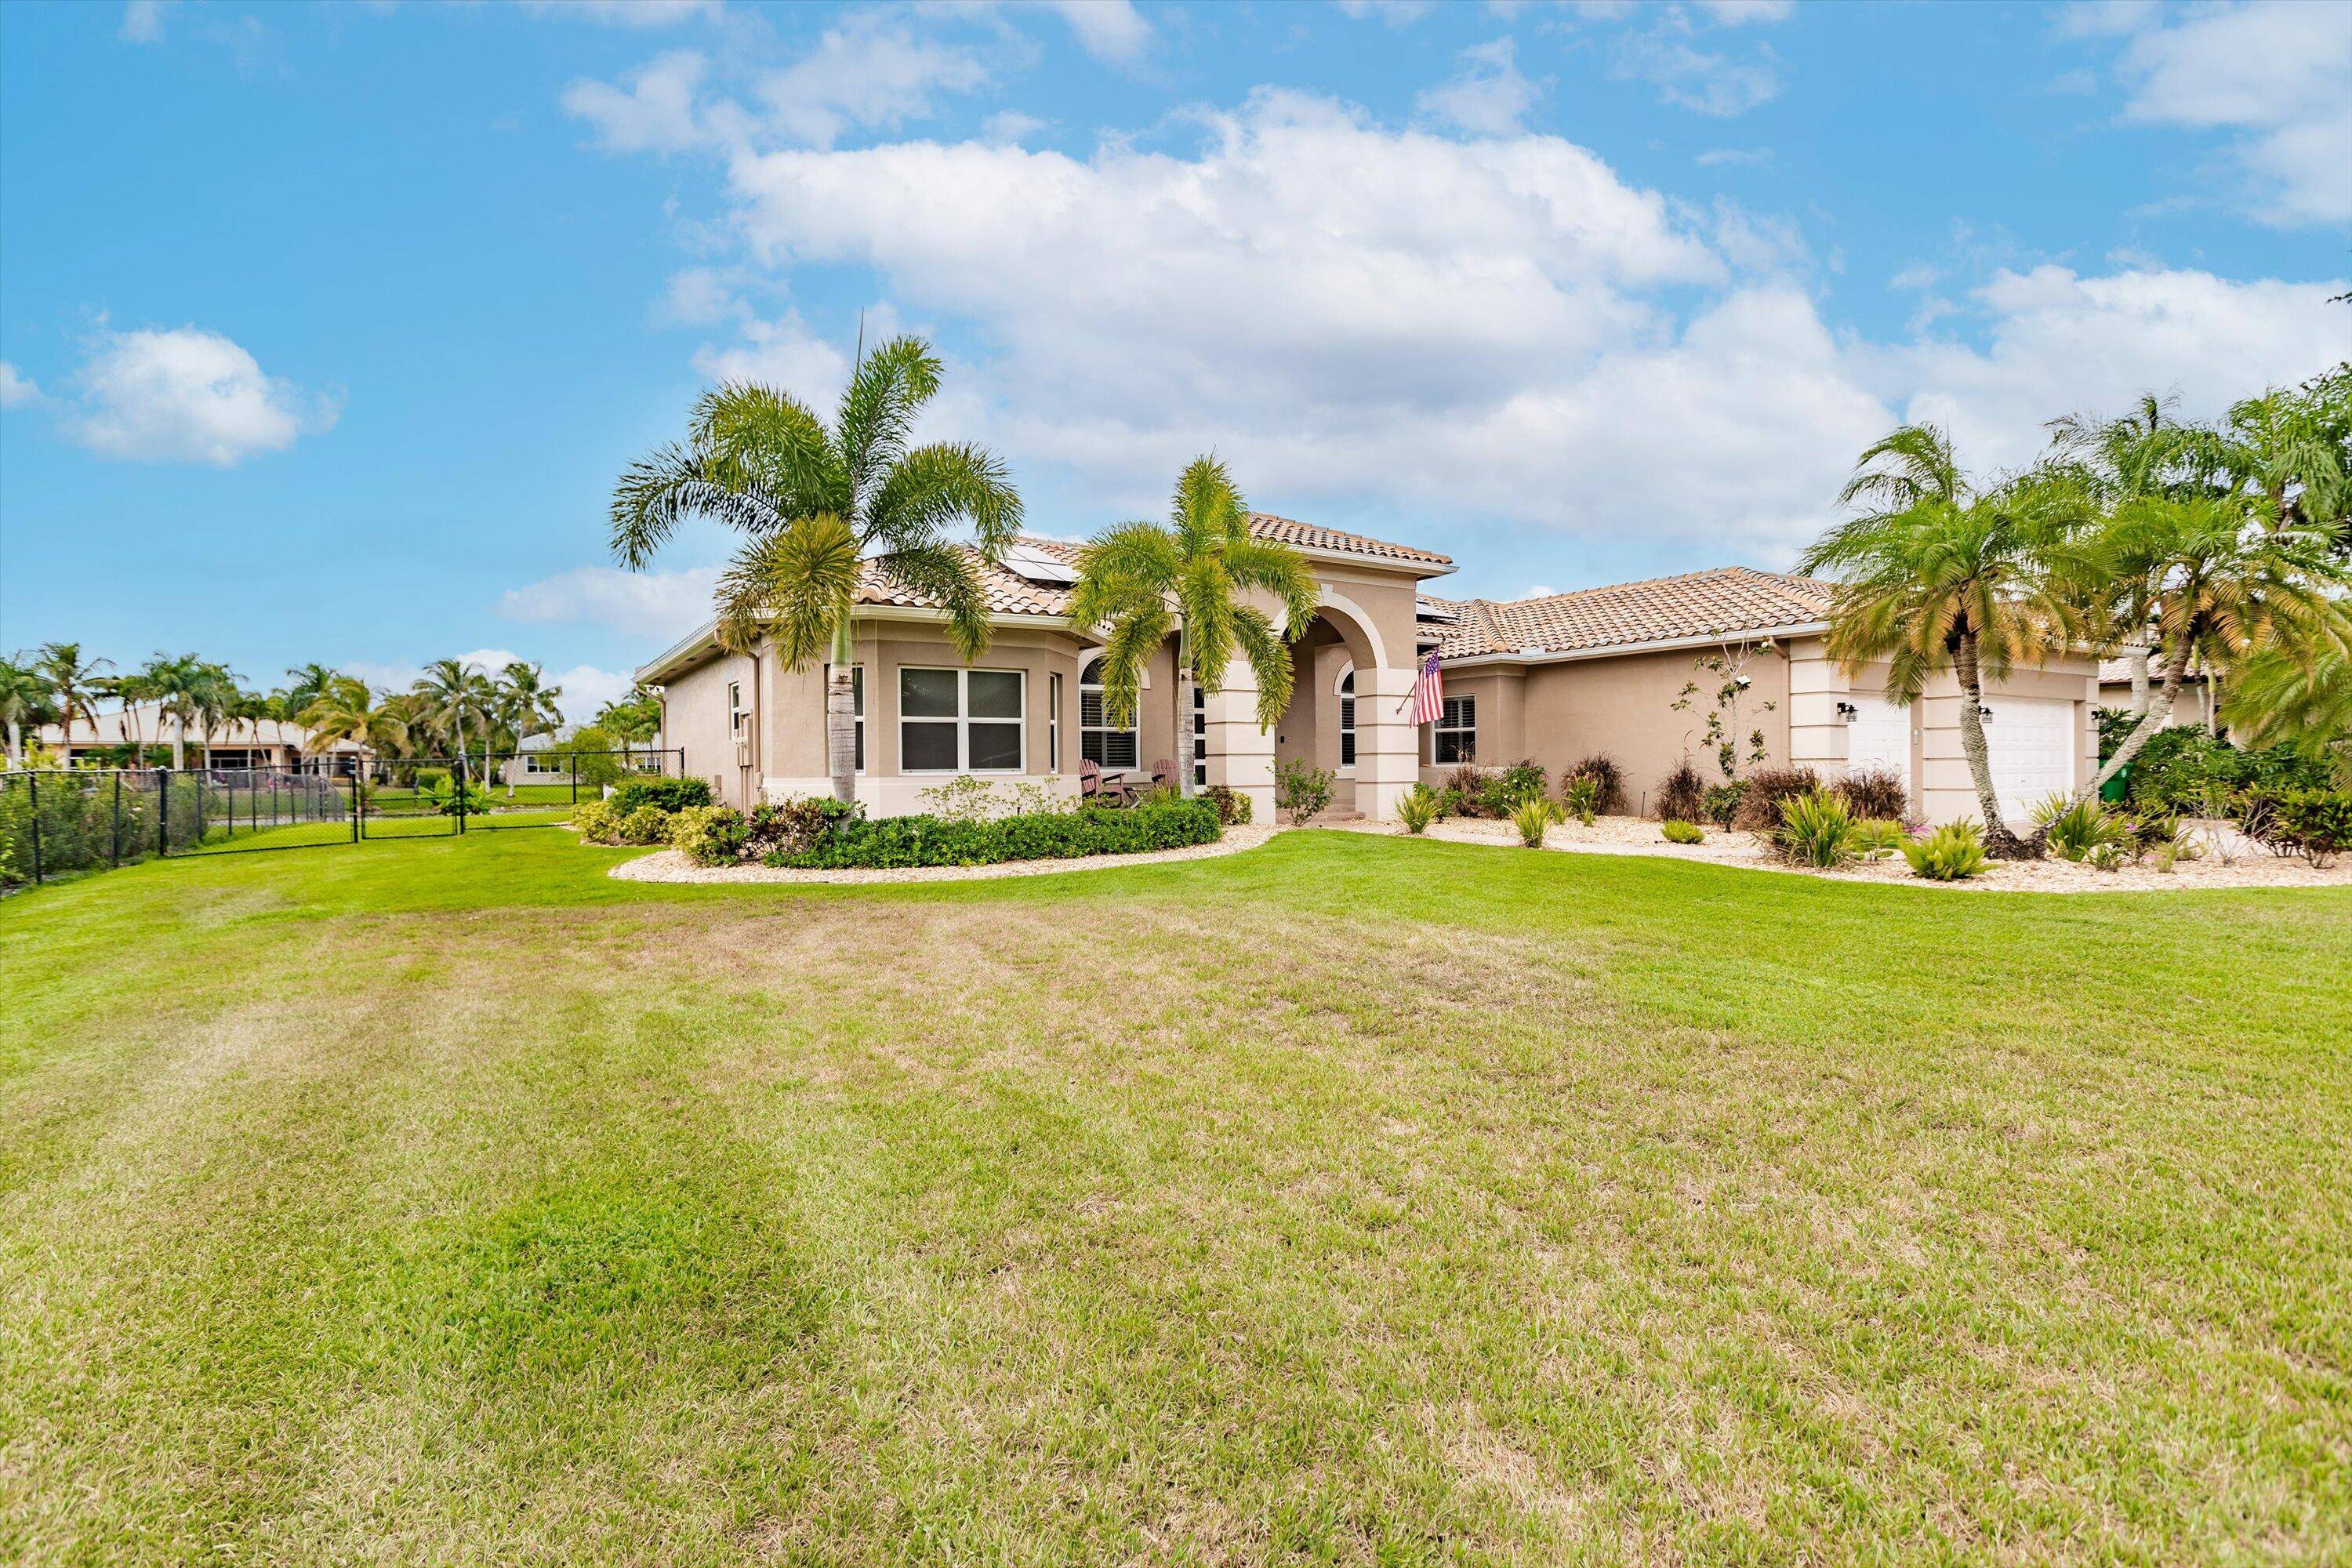 Newly listed beautiful Estate home in Gated Imagination Farms Community.